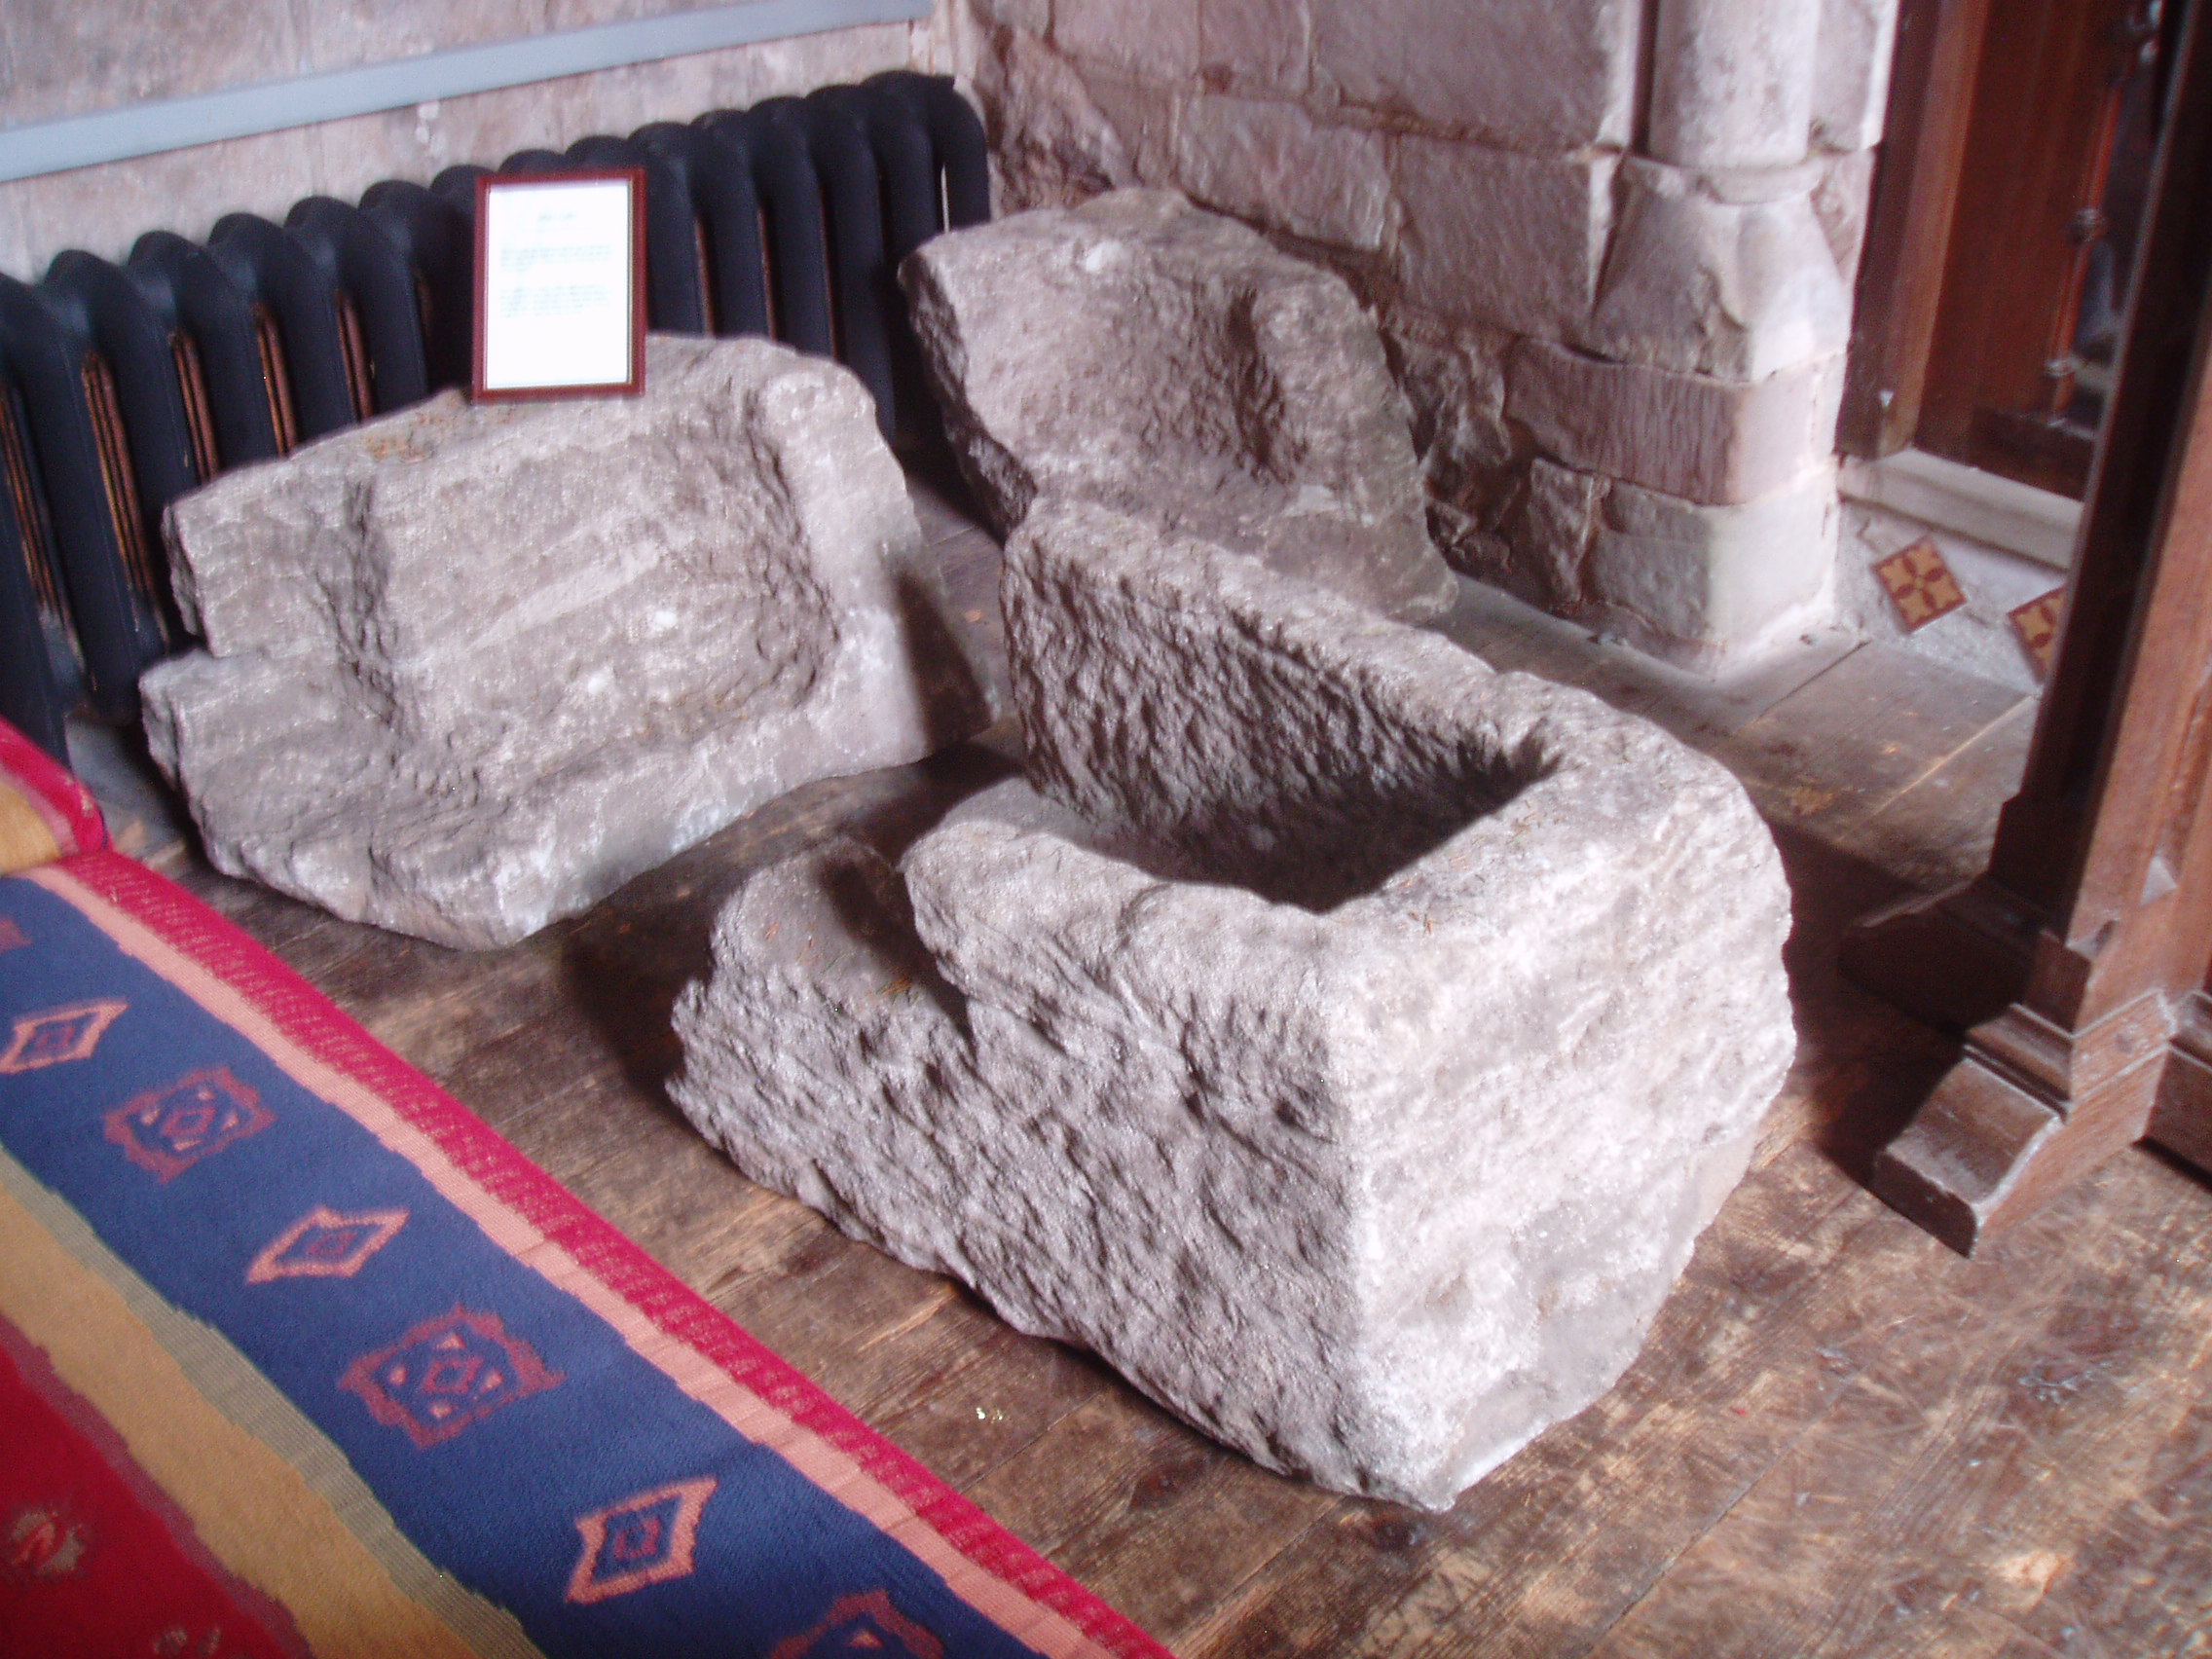 King Offa's Coffin, Offchurch Offchurch owes it's name to an association with Offa, king of Mercia, having reputedly founded the first church here. Fragments of an ancient stone coffin within the present building are believed to have belonged to his burial. The present St Gregory's church is an aiseless largely 12th century building (the windows mostly altered in the 14th century when the chancel was extended) with a 15th century tower. The interior is somewhat gloomy from the Victorian glass that filled every window, though a recently installed abstract window at the west end (by Roger Sargent who lives in the village) casts a serene blue light across the nave. Apart from the remains of Offa's coffin there are several minor wall tablets from the Baroque period.